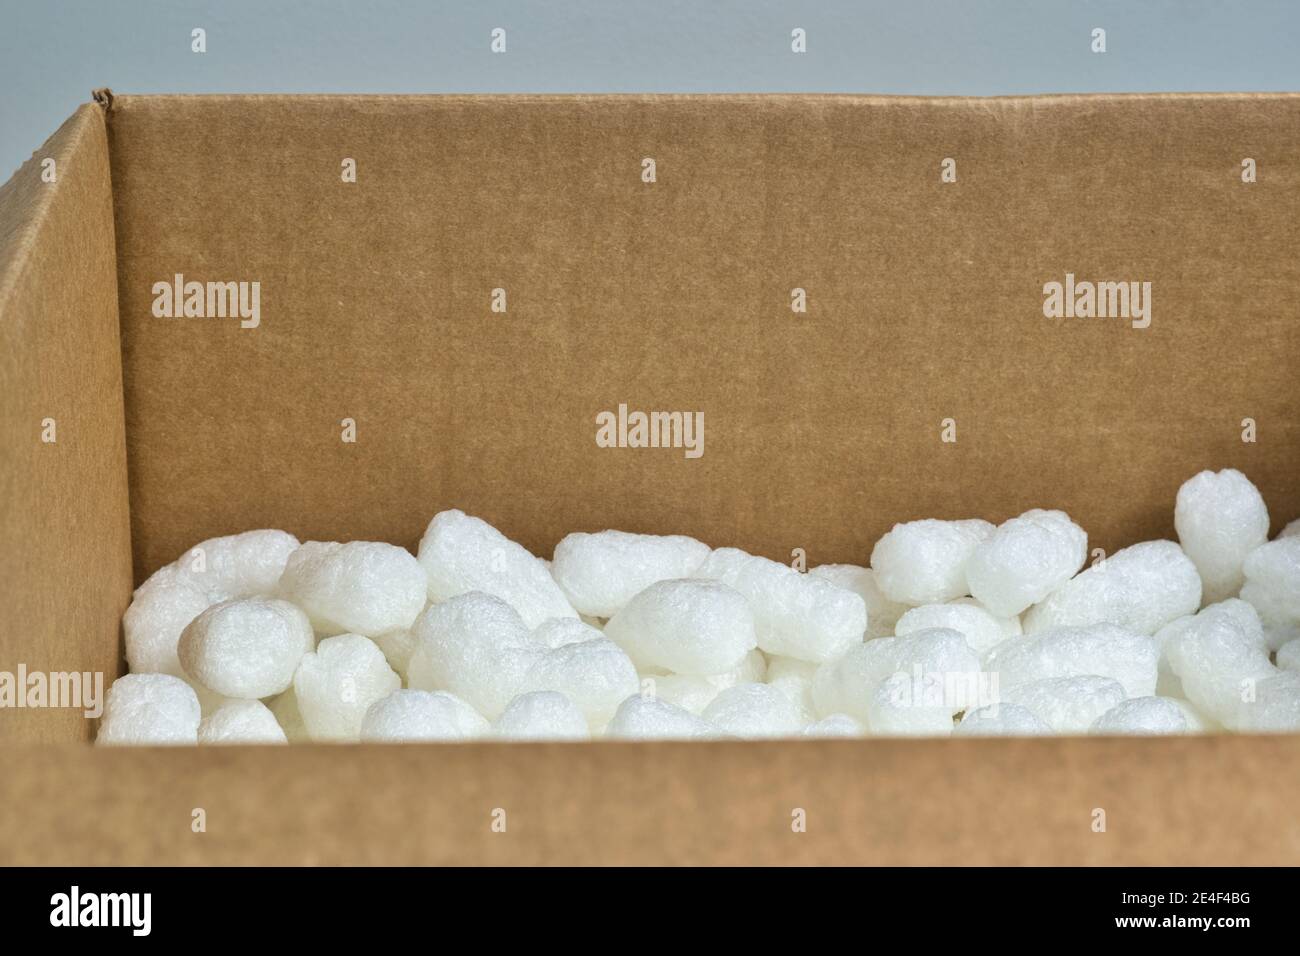 White packing peanuts styrofoam popcorn packaging material inside a cardboard box, angle view with copy space. Stock Photo